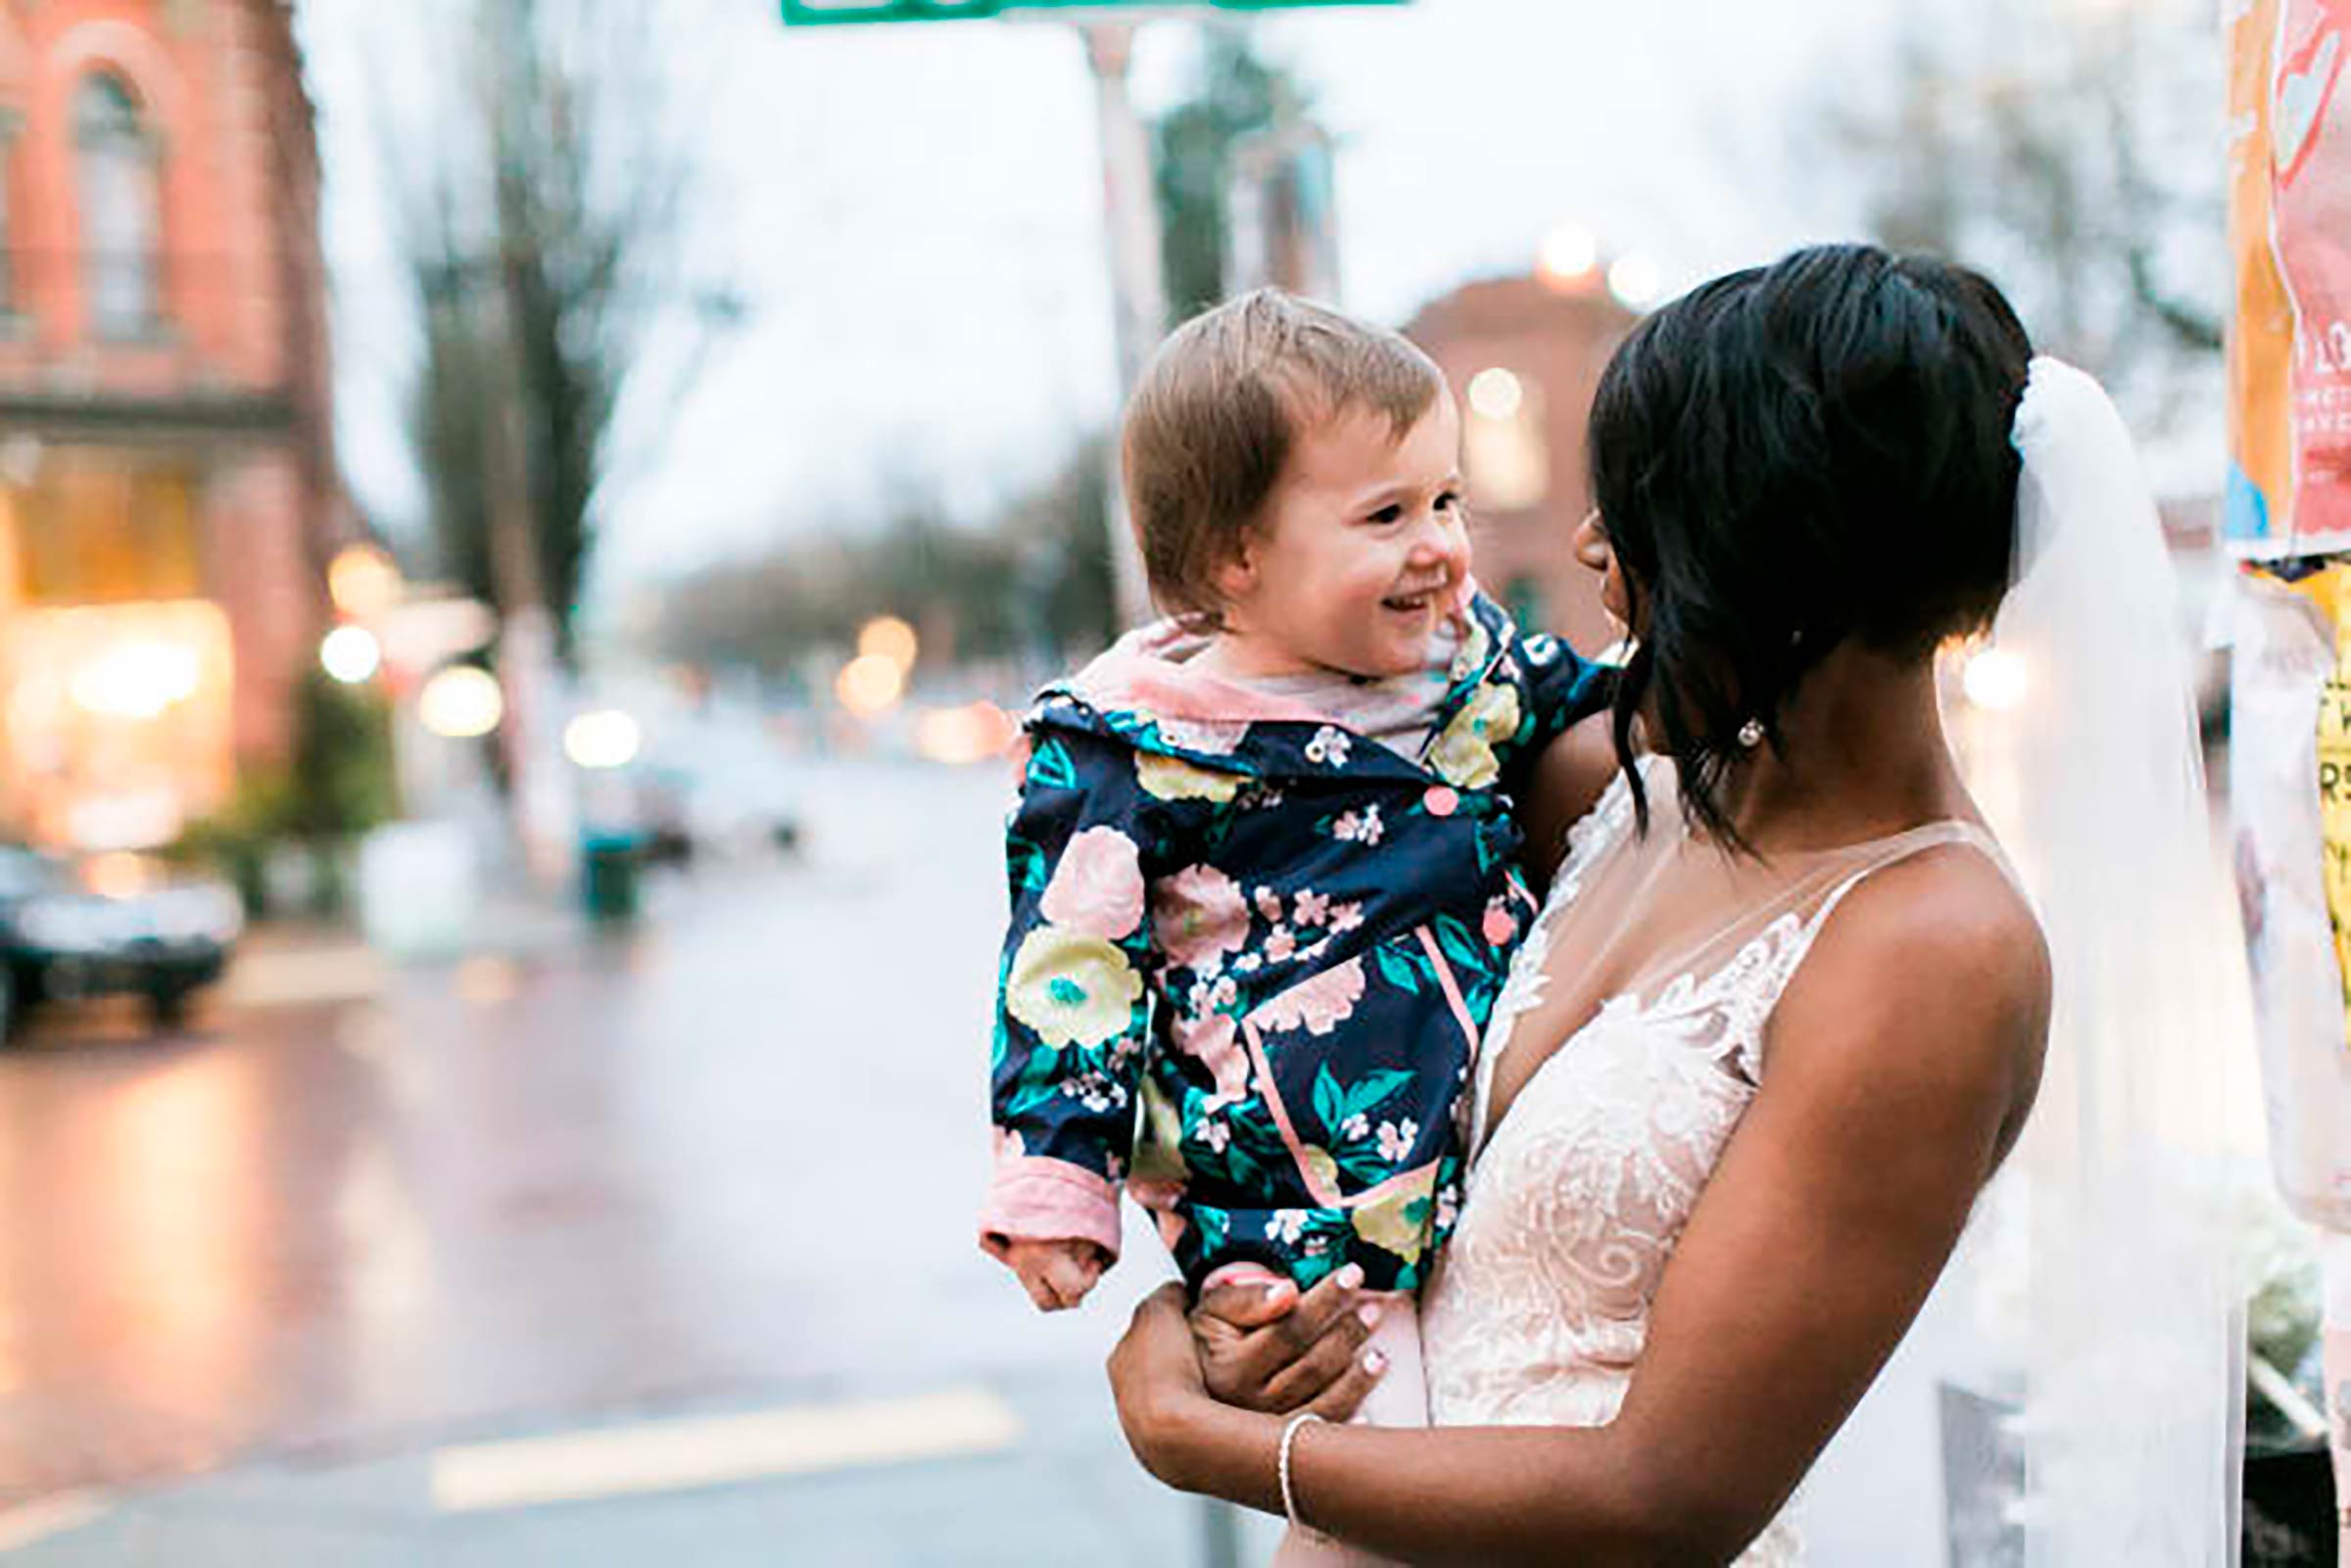 This Little Girl Thought This Bride Was a Princess, and Her Reaction ...